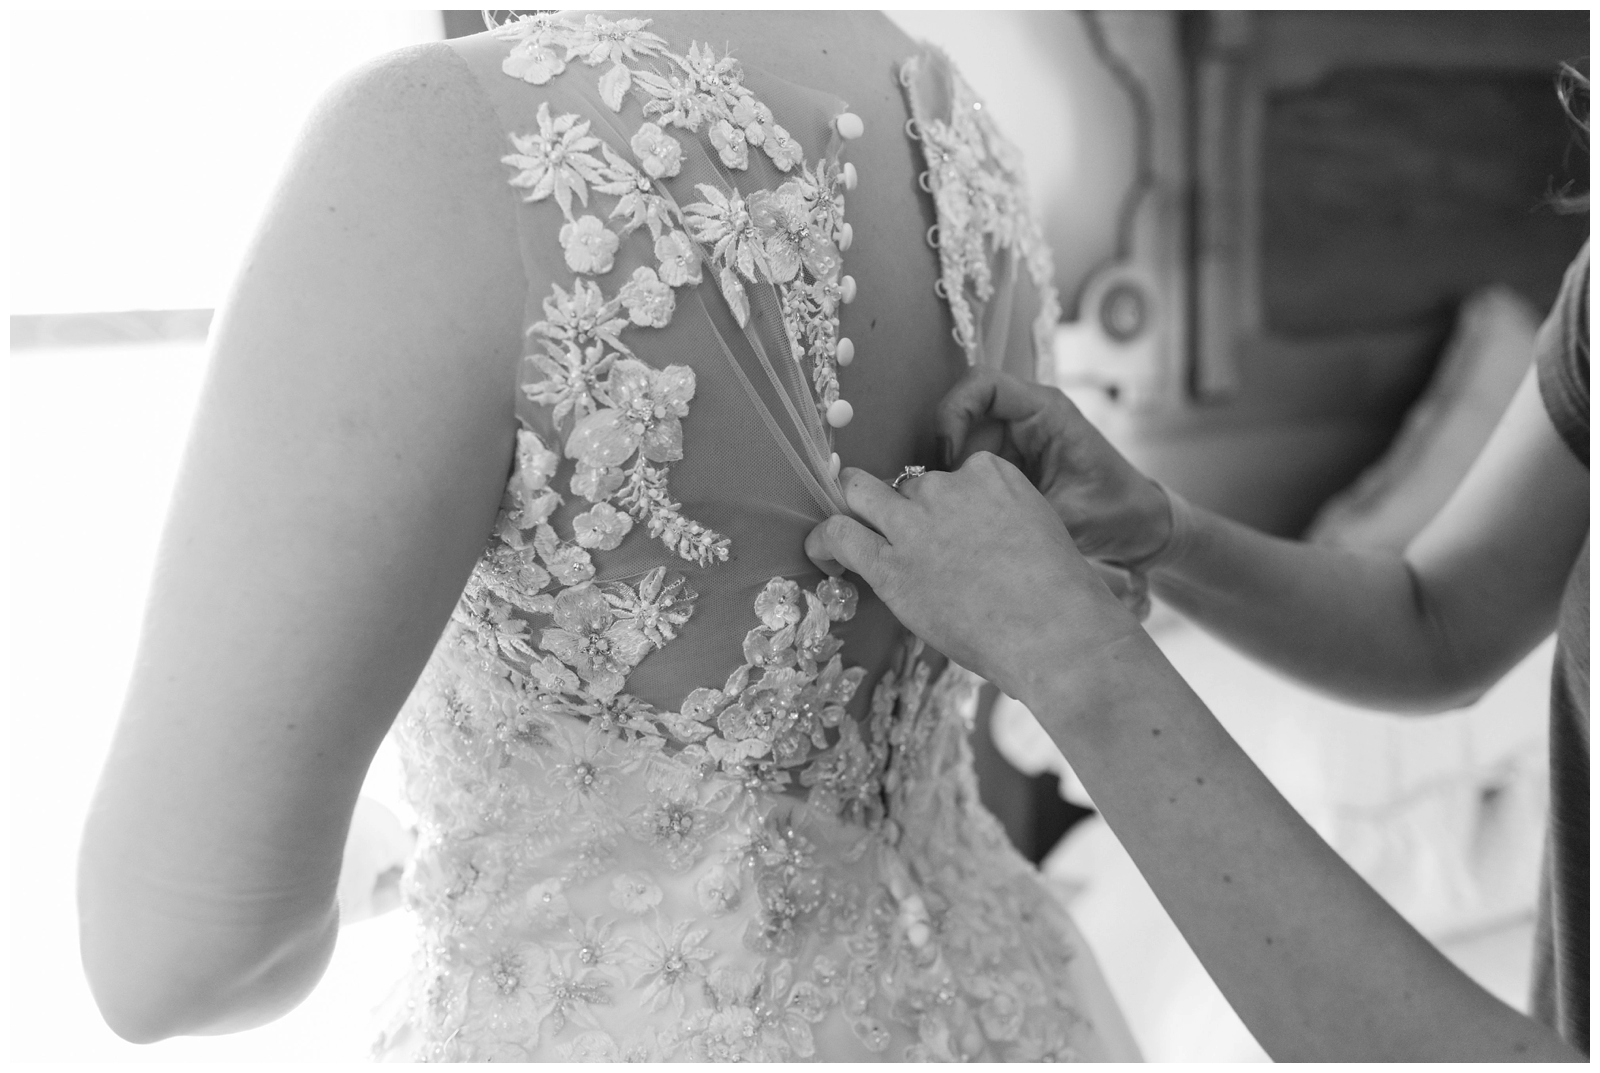 bridesmaid helping bride button lace Madison James wedding gown details photographed by Pipers Photography